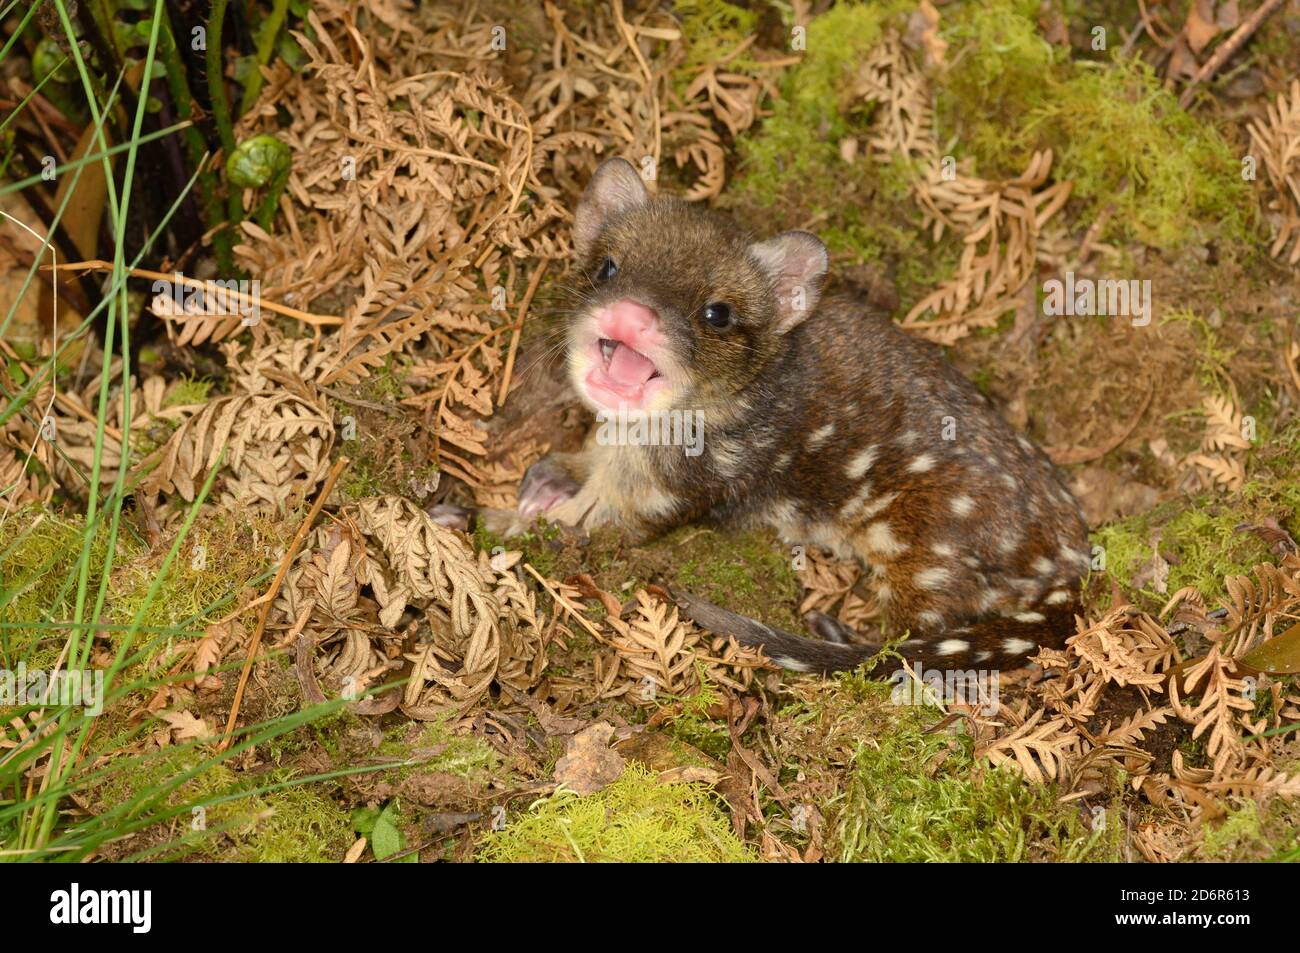 Spotted-tailed Quoll Dasyurus maculatus Young Photographed in Tasmania, Australia Stock Photo